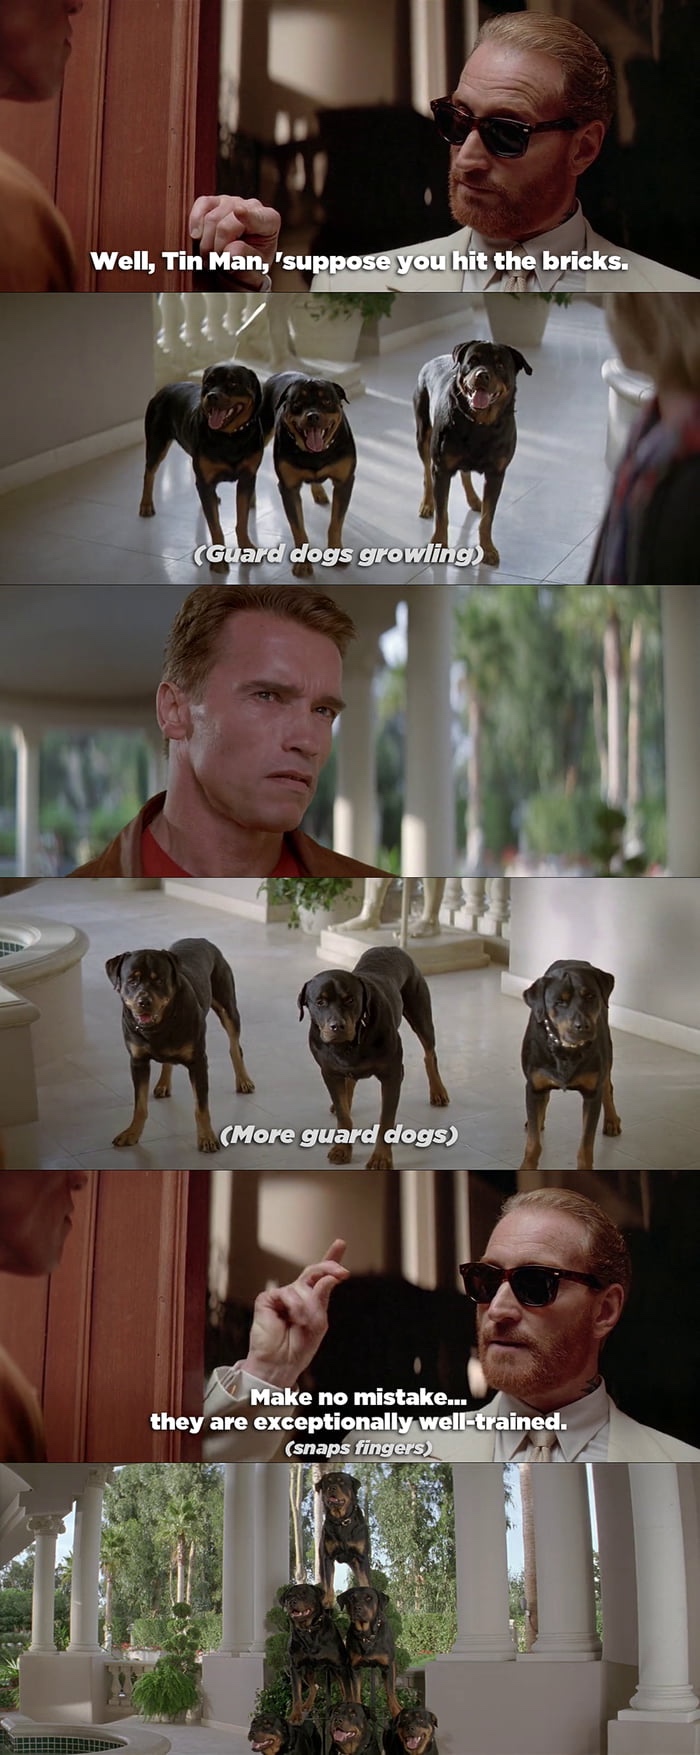 last action hero memes - Well, Tin Man, 'suppose you hit the bricks. Guard dogs growling More guard dogs Make no mistake... they are exceptionally welltrained. snaps fingers